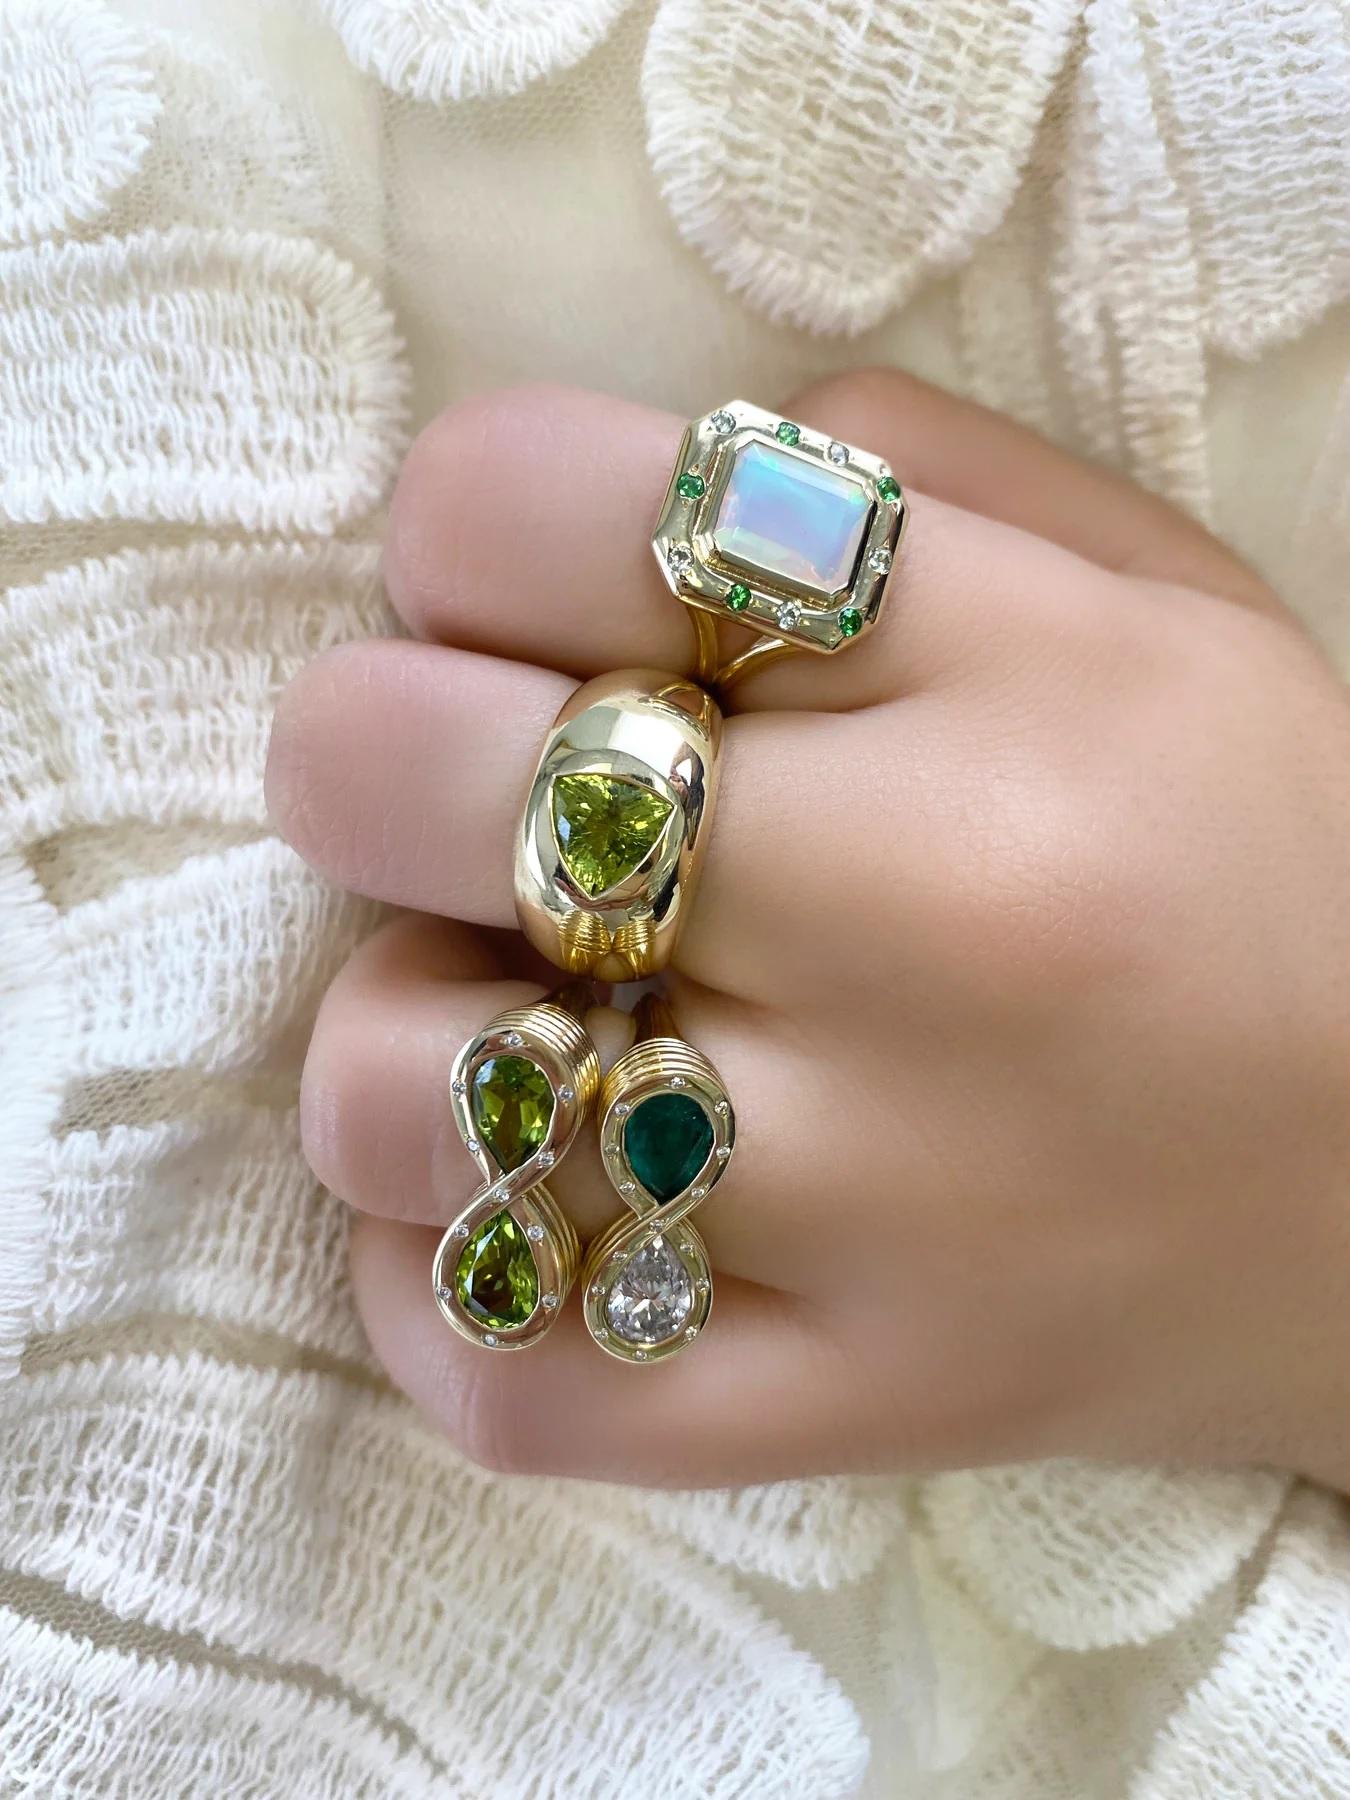 The ultimate everyday cocktails ring is found with this gorgeous Ethiopian Opal, Sapphire and Aquamarine ring. She boasts 2.45 carats of dazzling Opal and is constructed with our signature double shank to ensure a great fit. Gilded with a generous